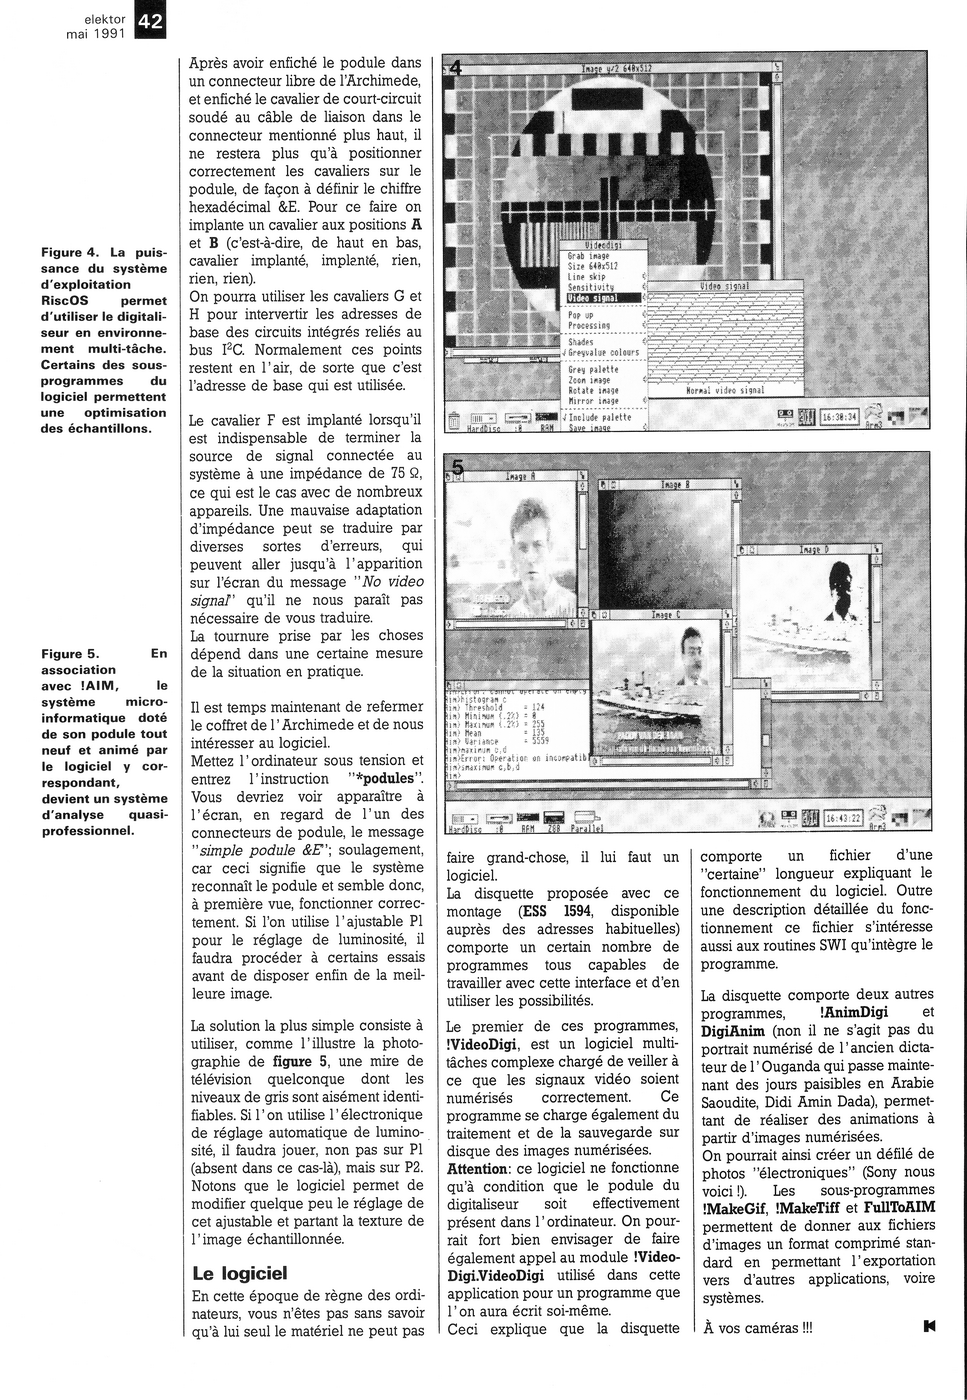 Article page 7/7 (click for magazine front)